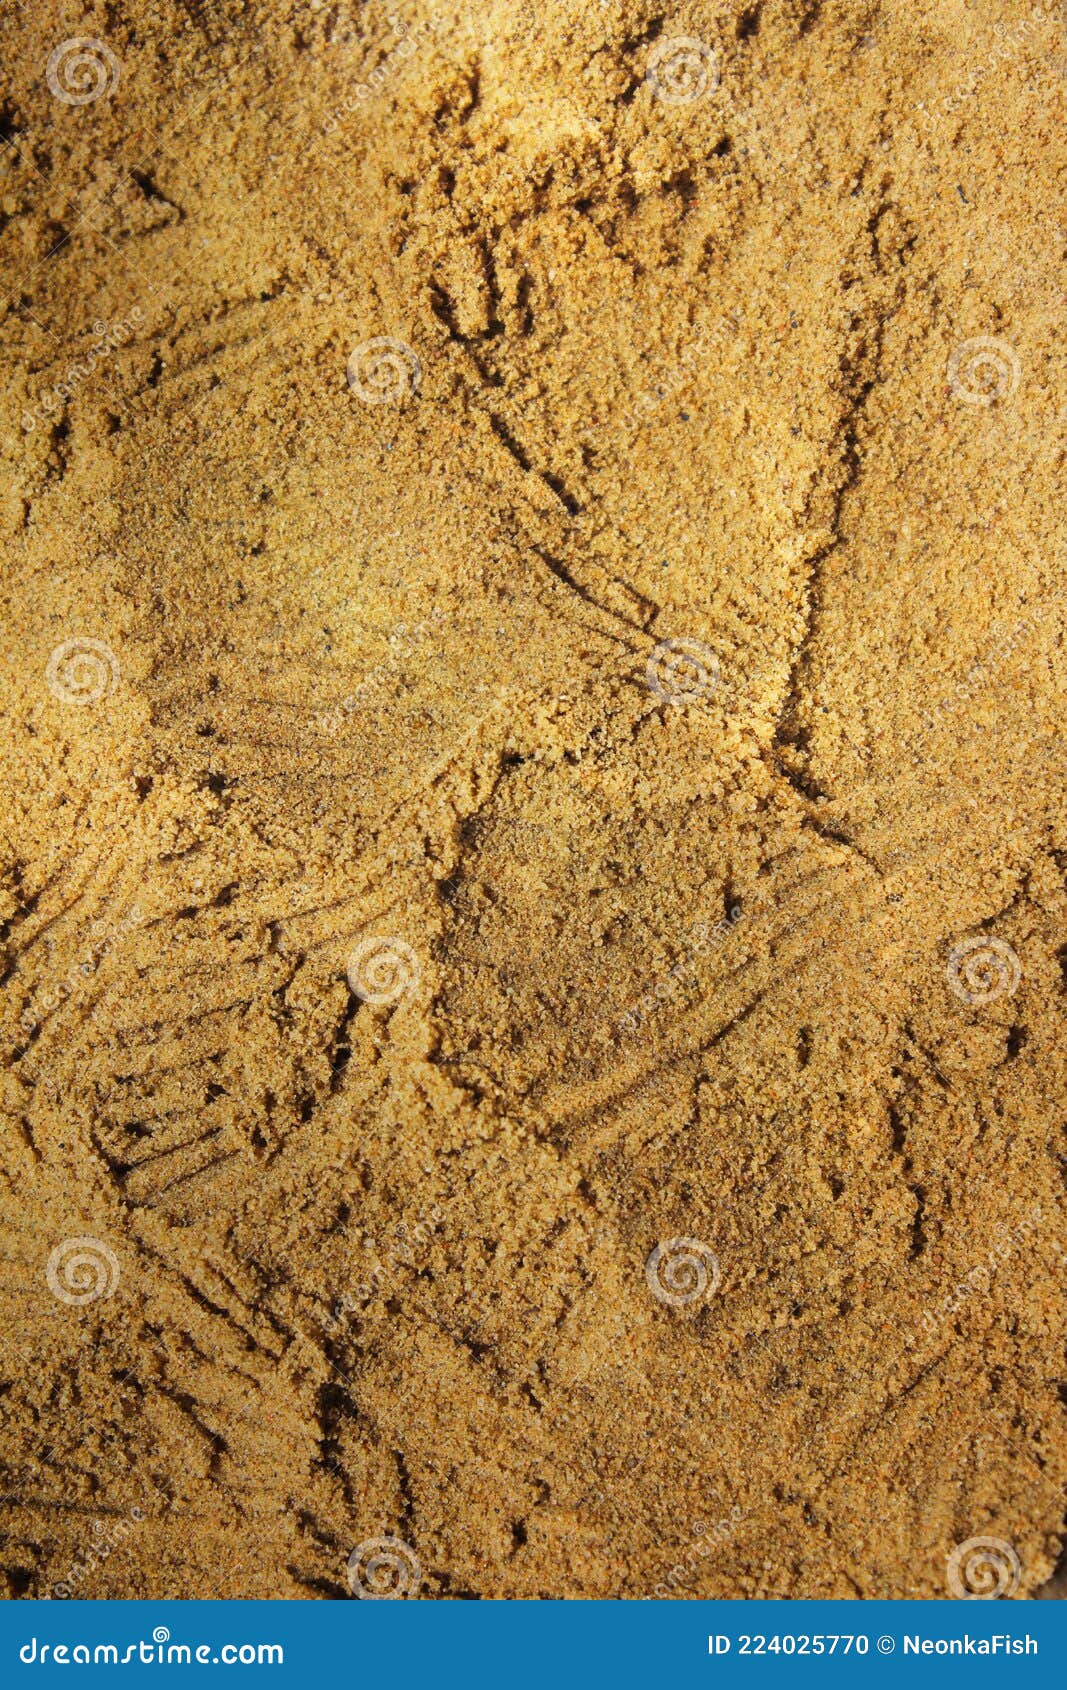 remarkable natural rough sand texture with conch imprints